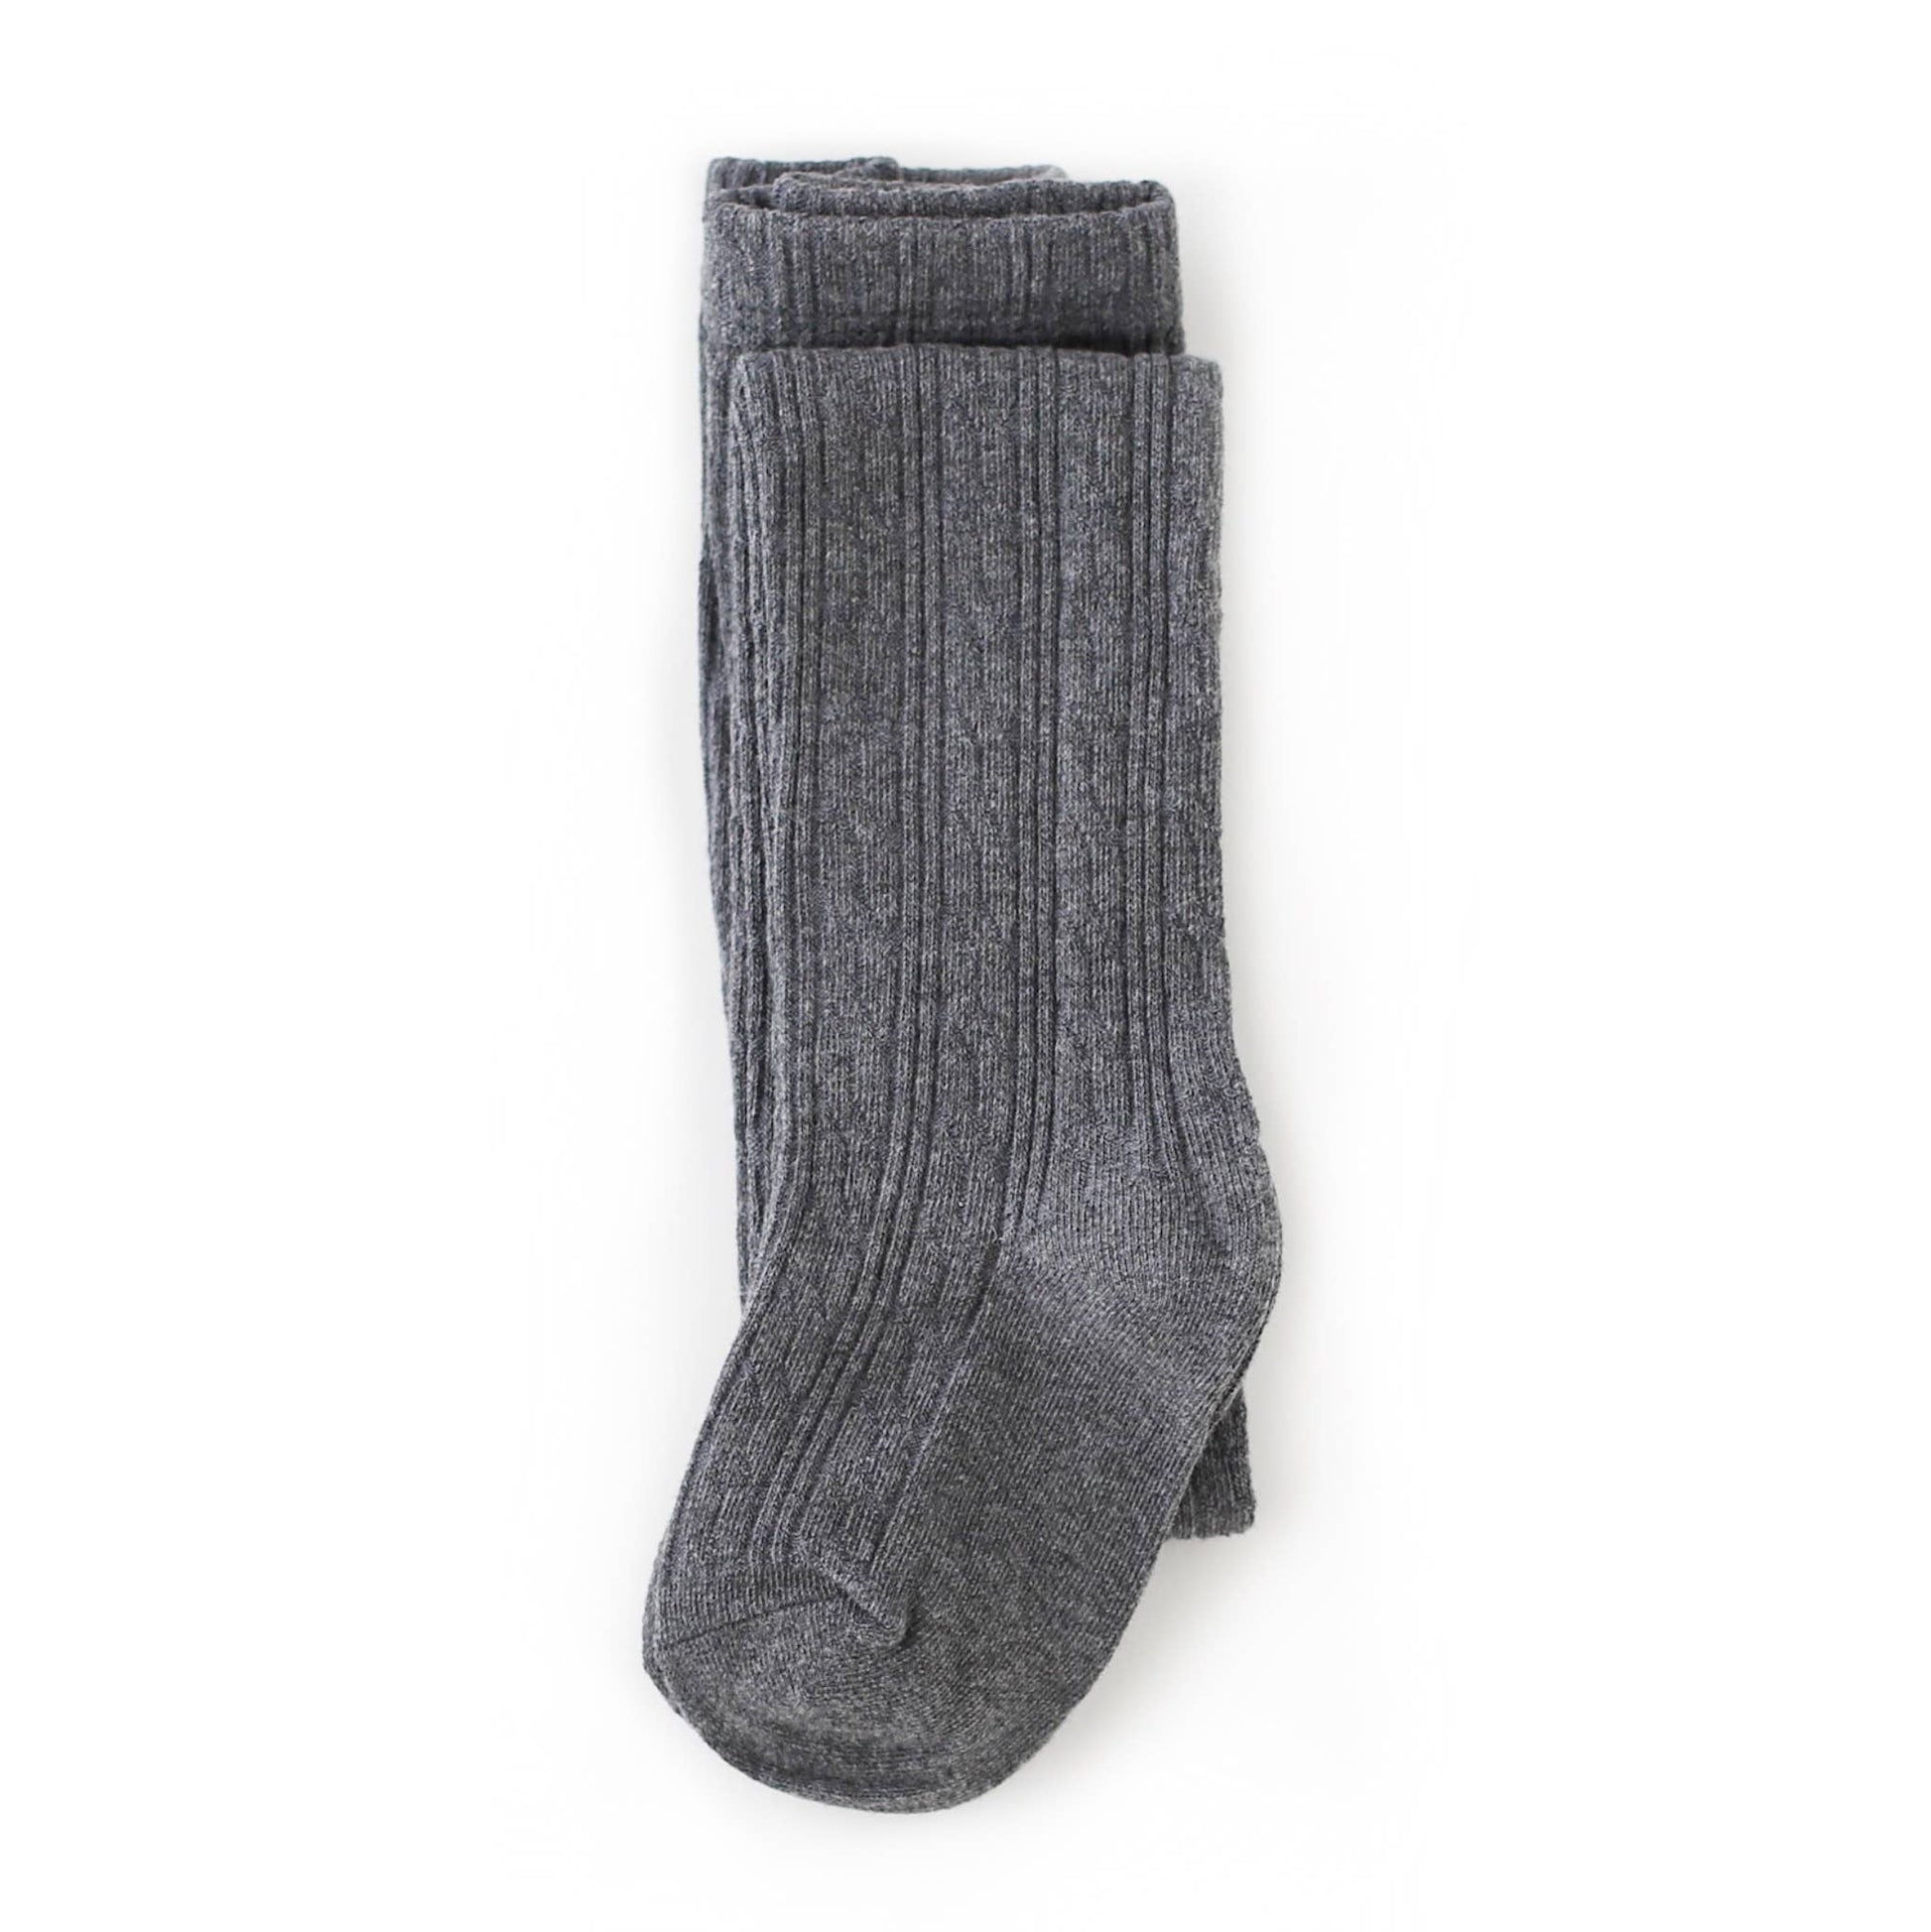 Charcoal Grey Cable Knit Tights - Little Stocking Company